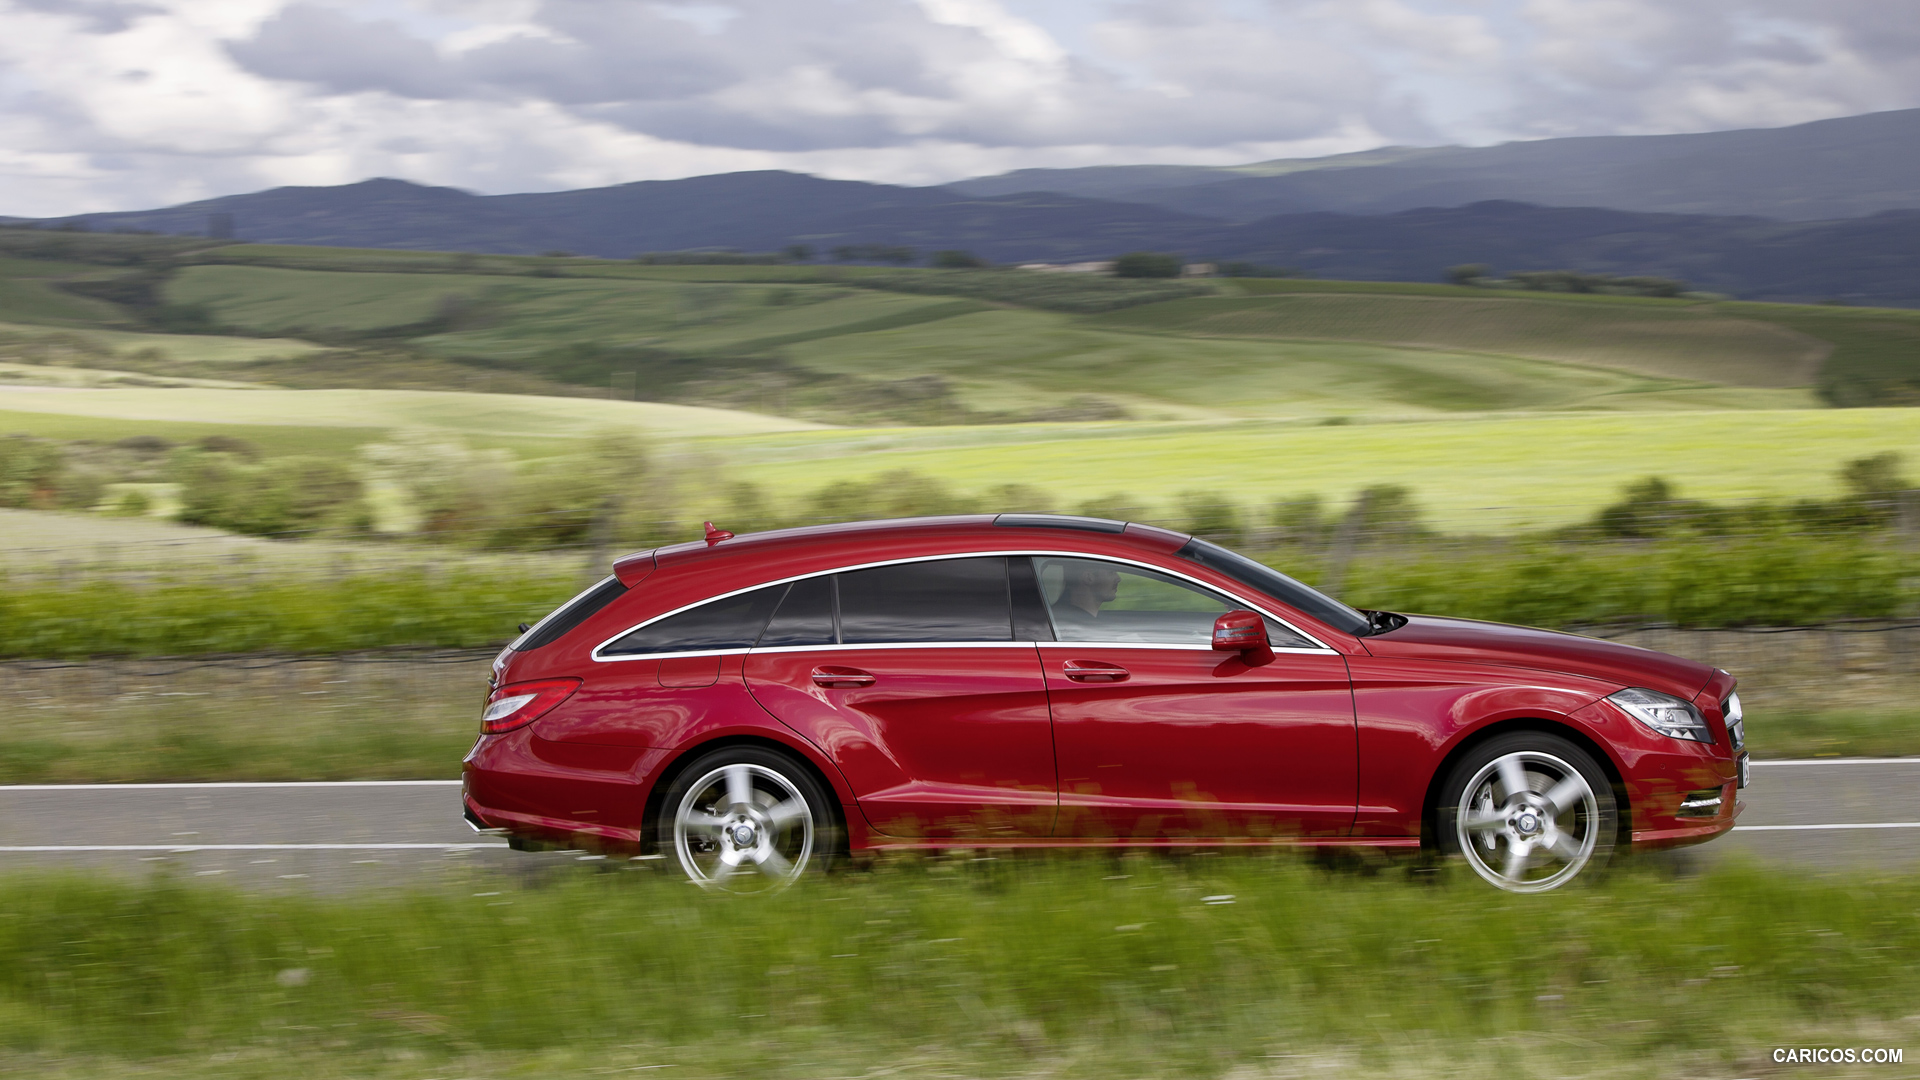 2013 Mercedes-Benz CLS 500 4MATIC Shooting Brake - Side, #8 of 184